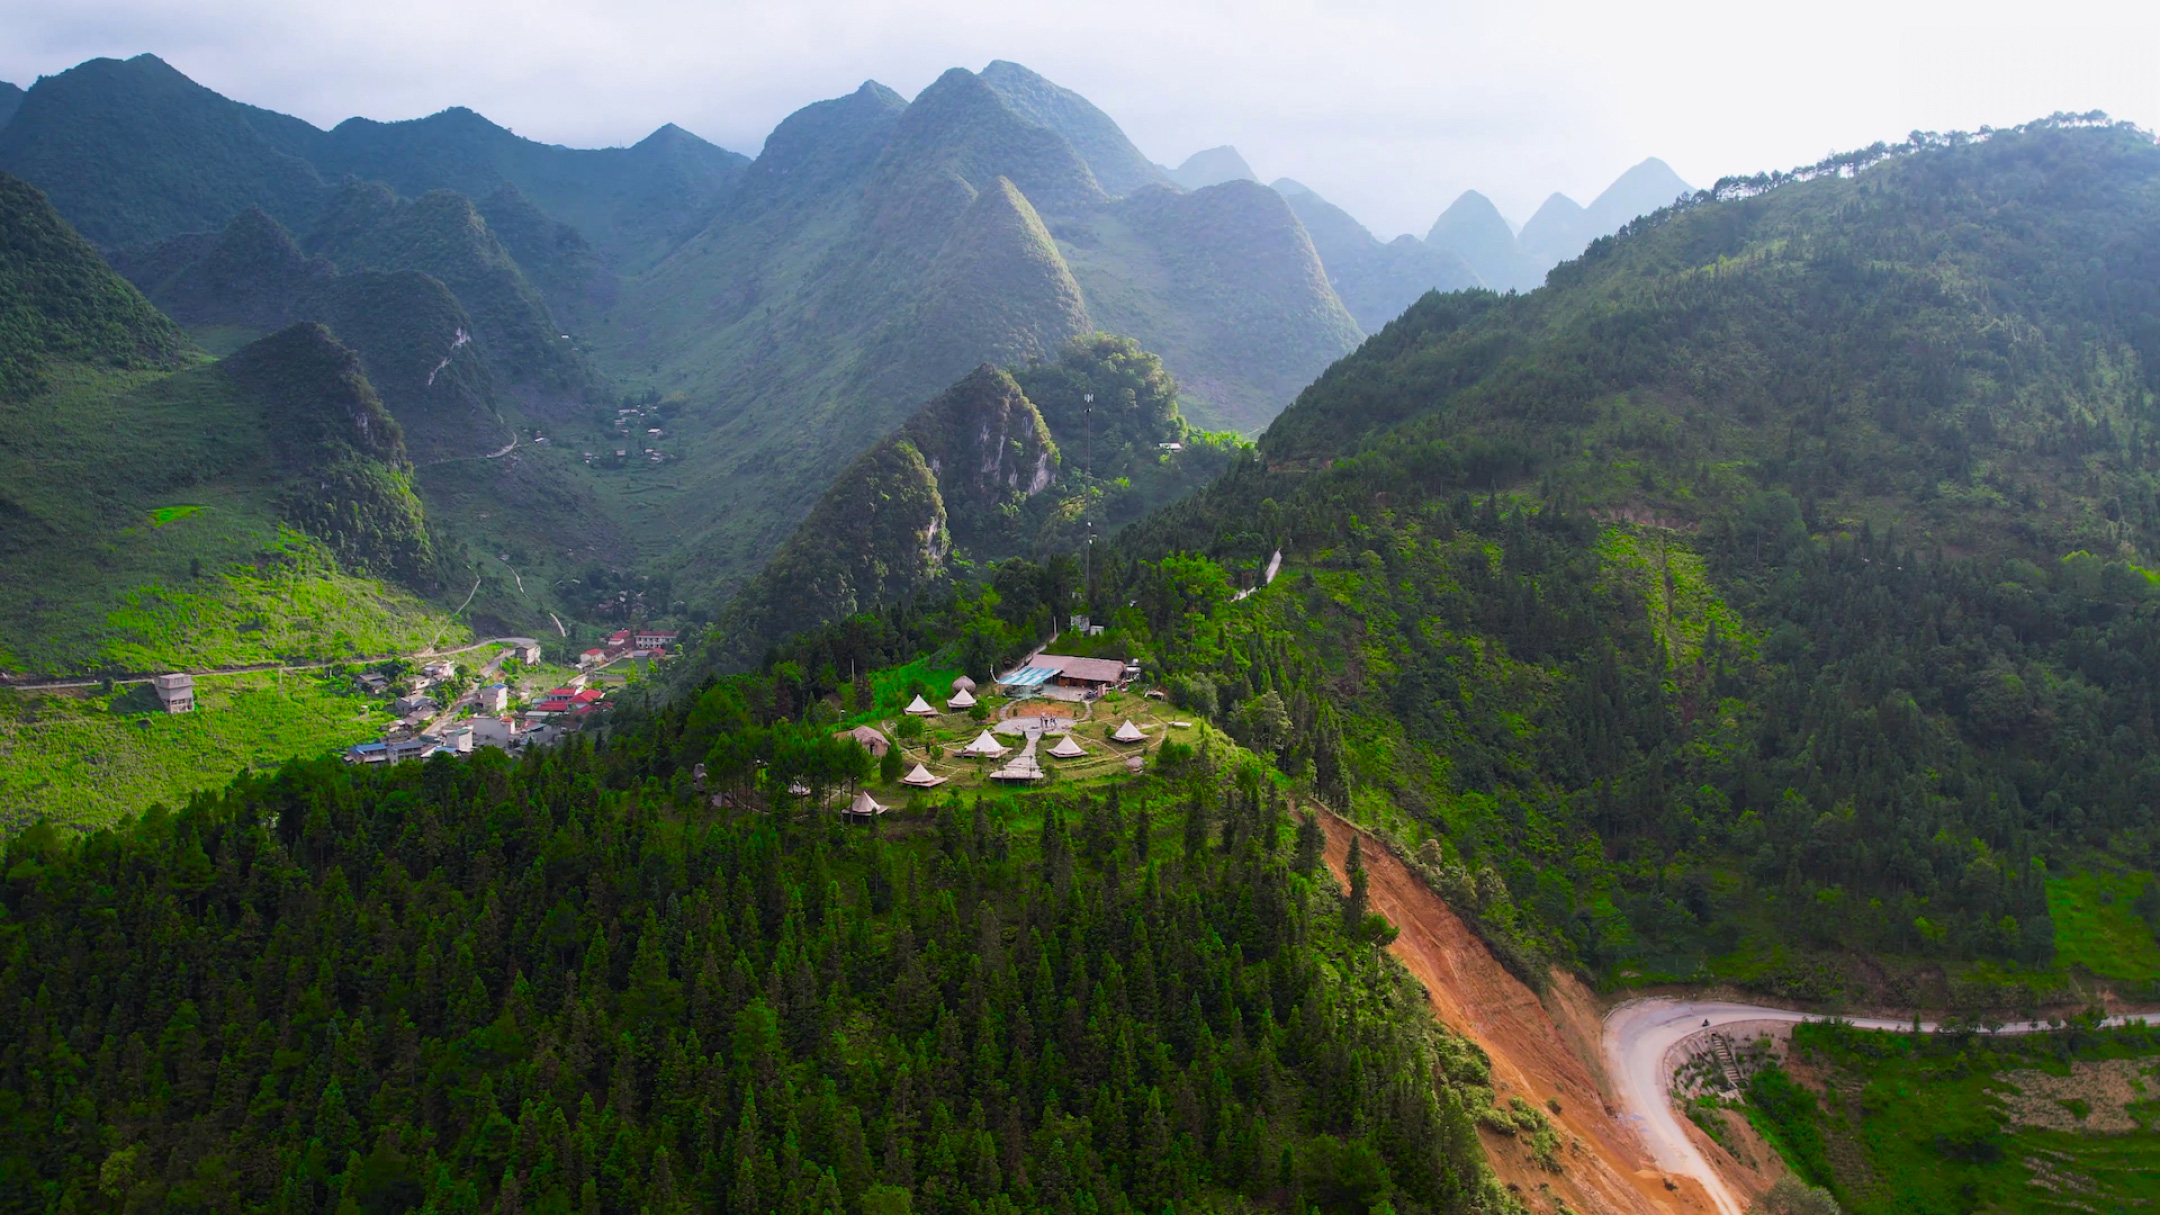 Breathtaking views in Ha Giang that you would never tire of!